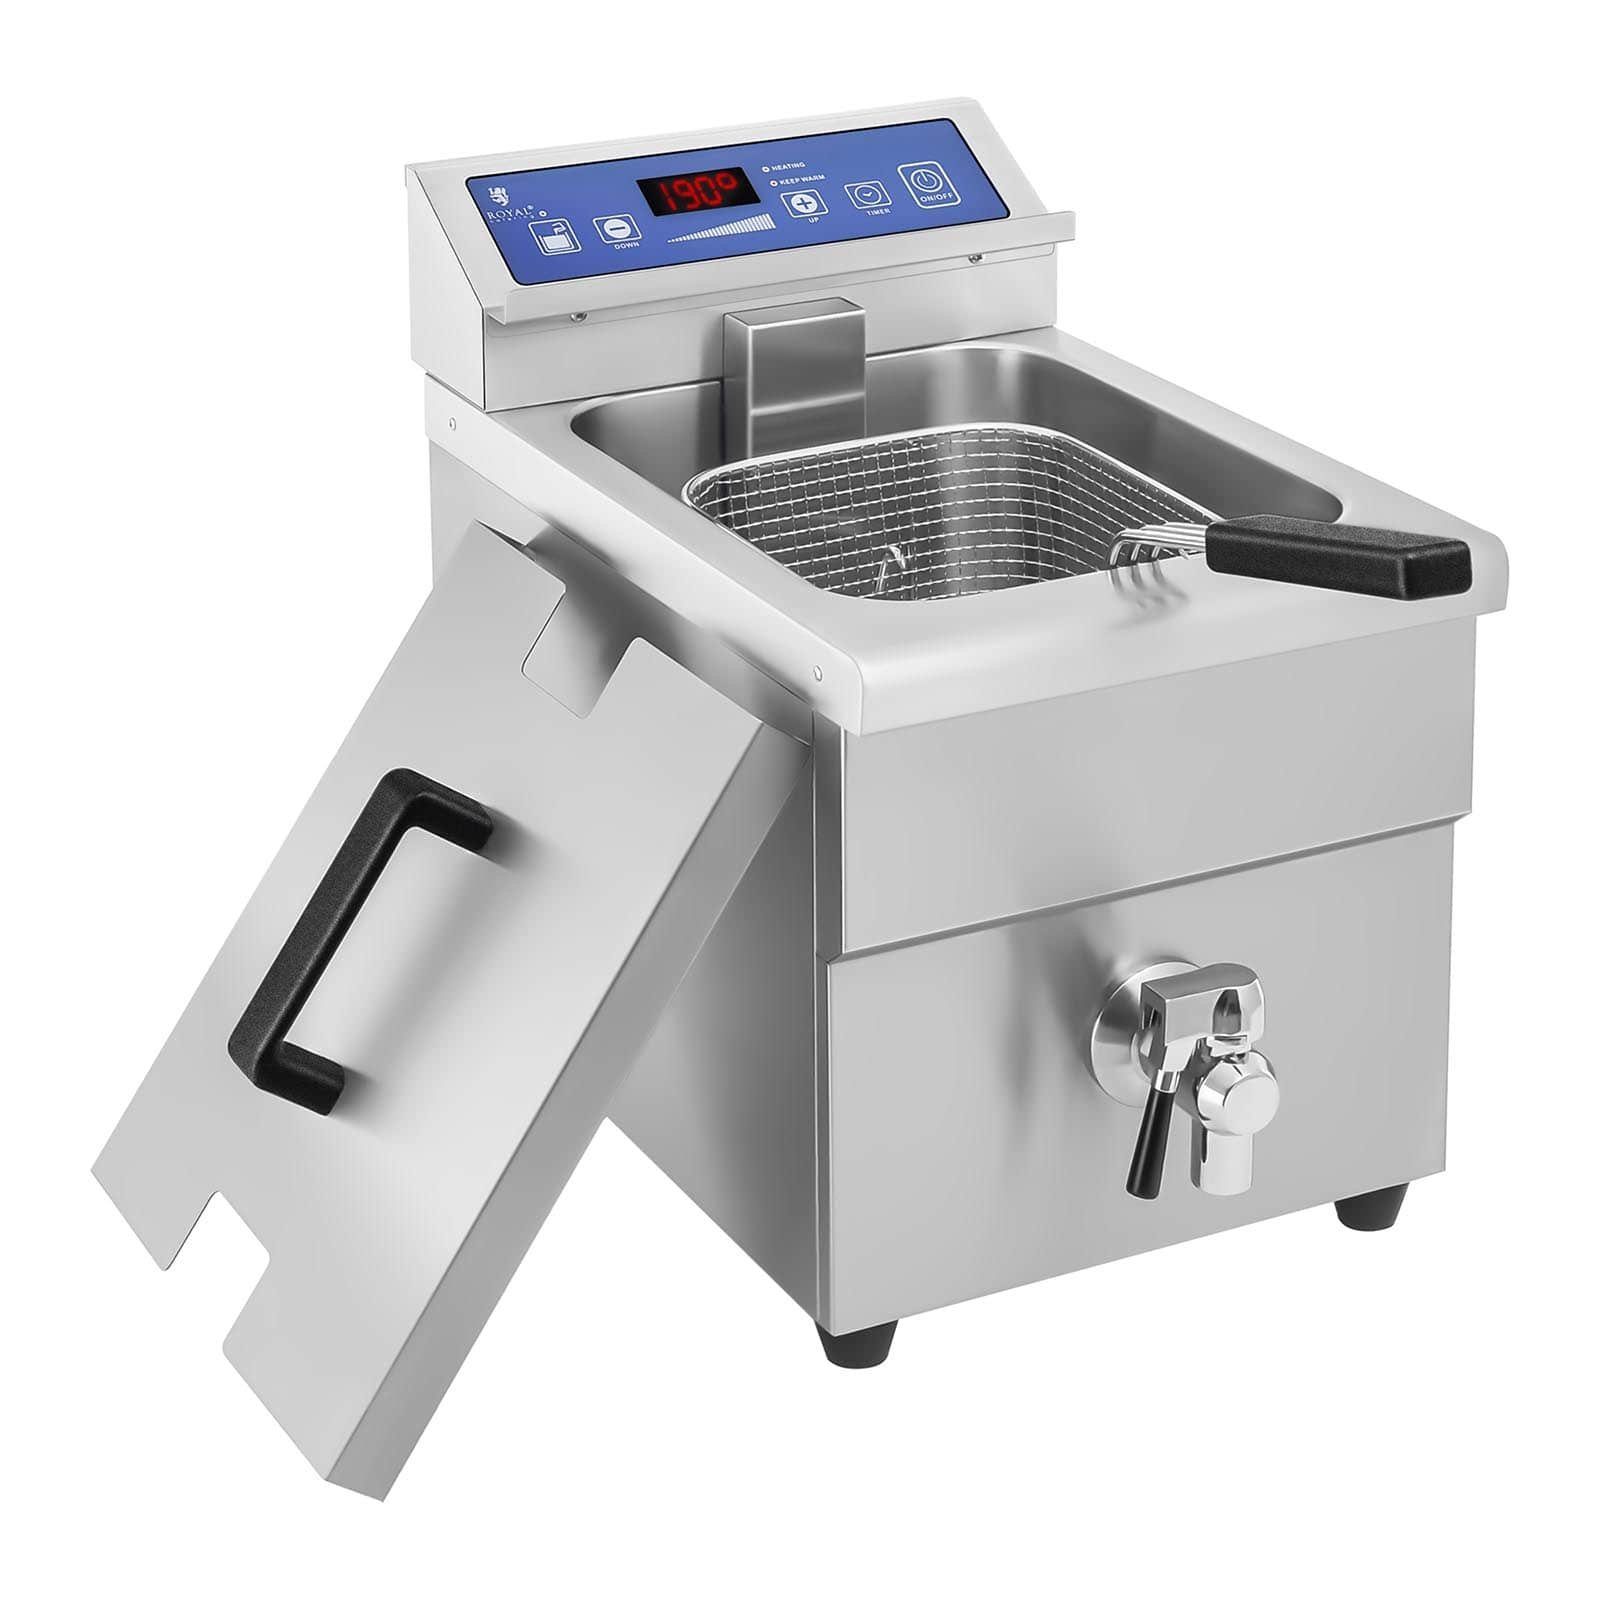 Royal 10 Induktionsfritteuse W Elektro, Fritteuse Catering 3500 Friteuse L Fritteuse Fritöse